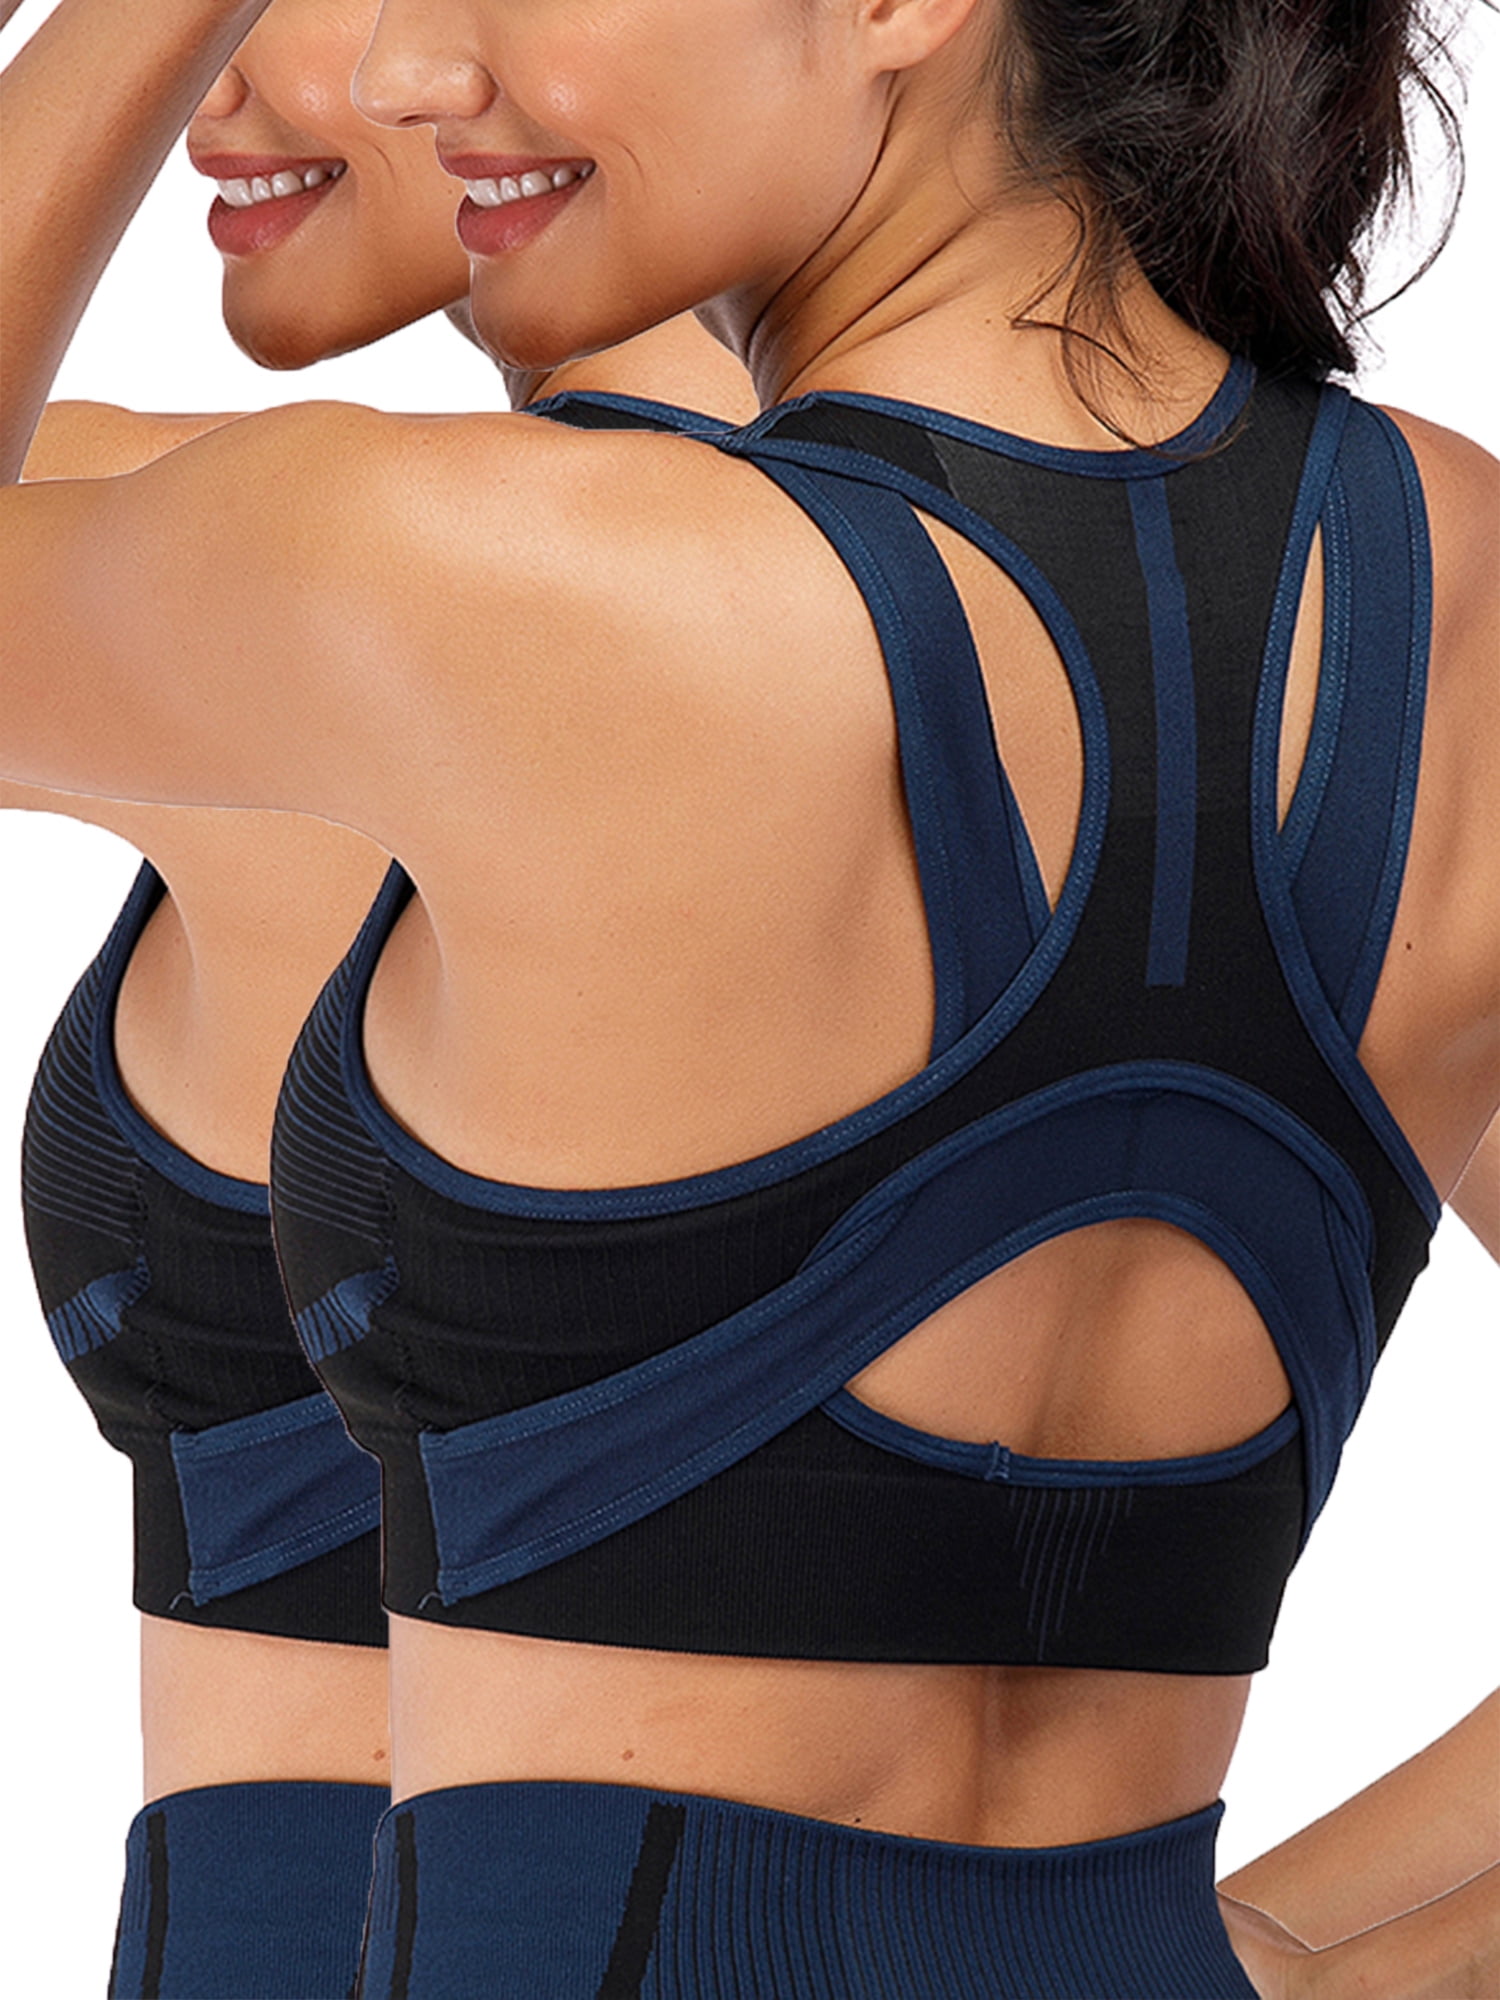 Sample Free Sports Bras Plus Size XL Padded Wirefree Breathable - China  Soprts Bra and Yoga Bra price